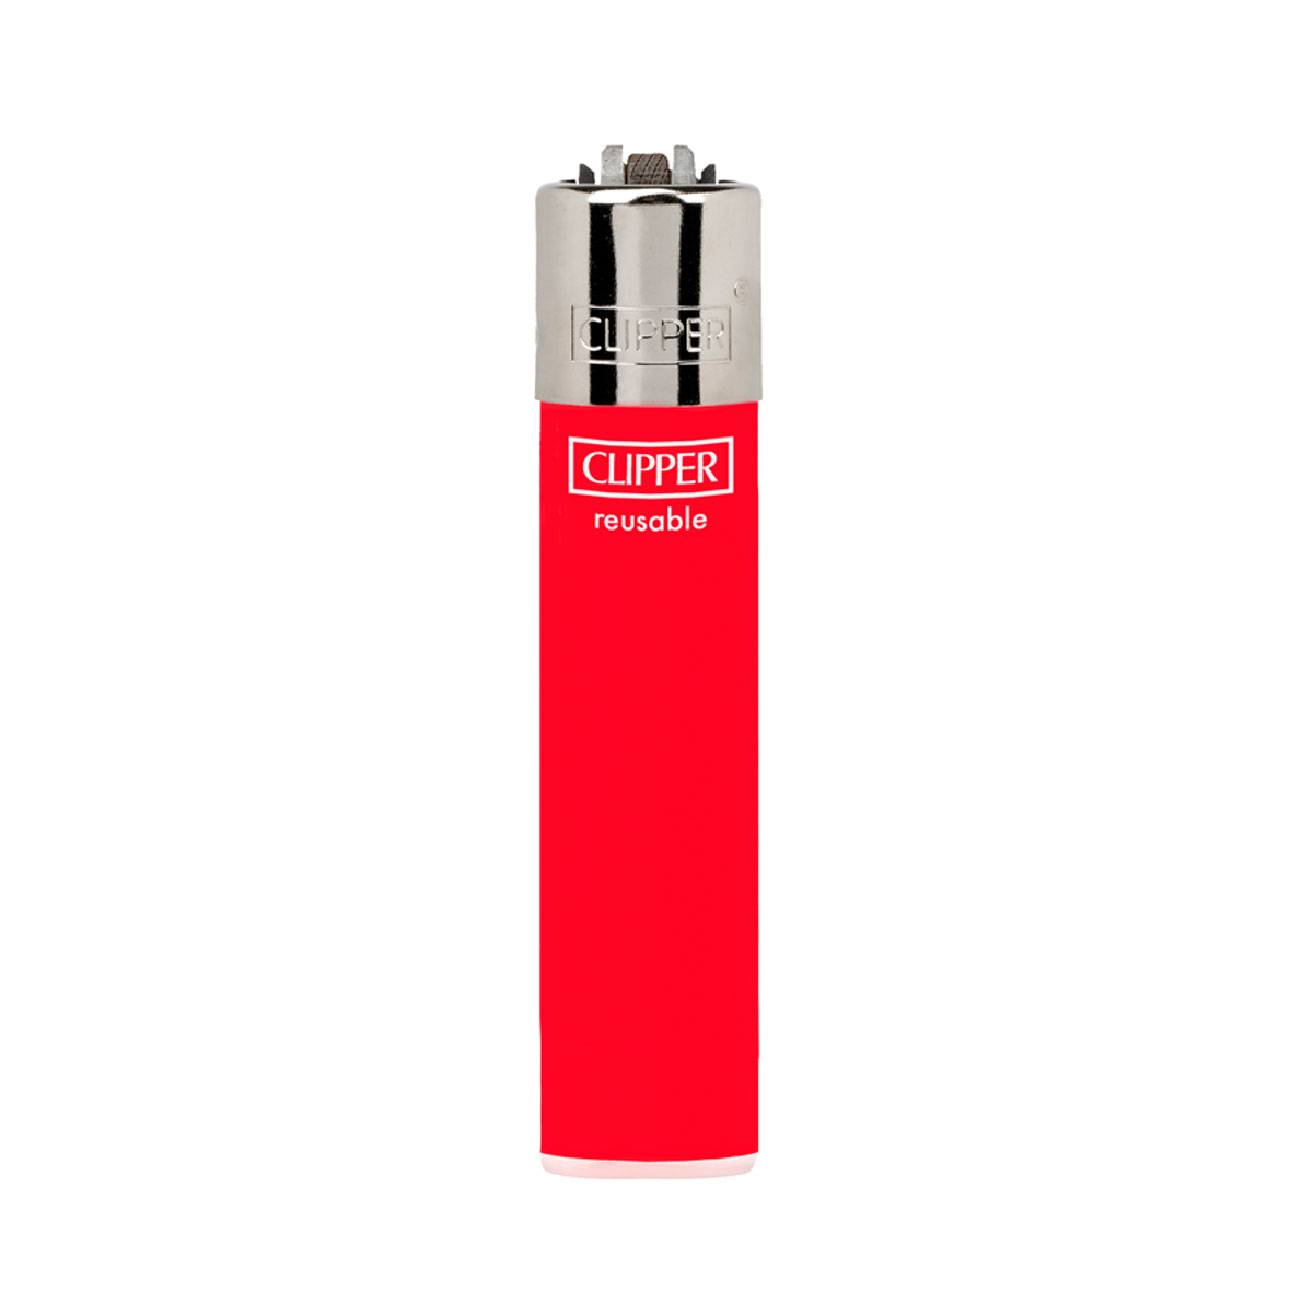 Clipper Classic Large lighter